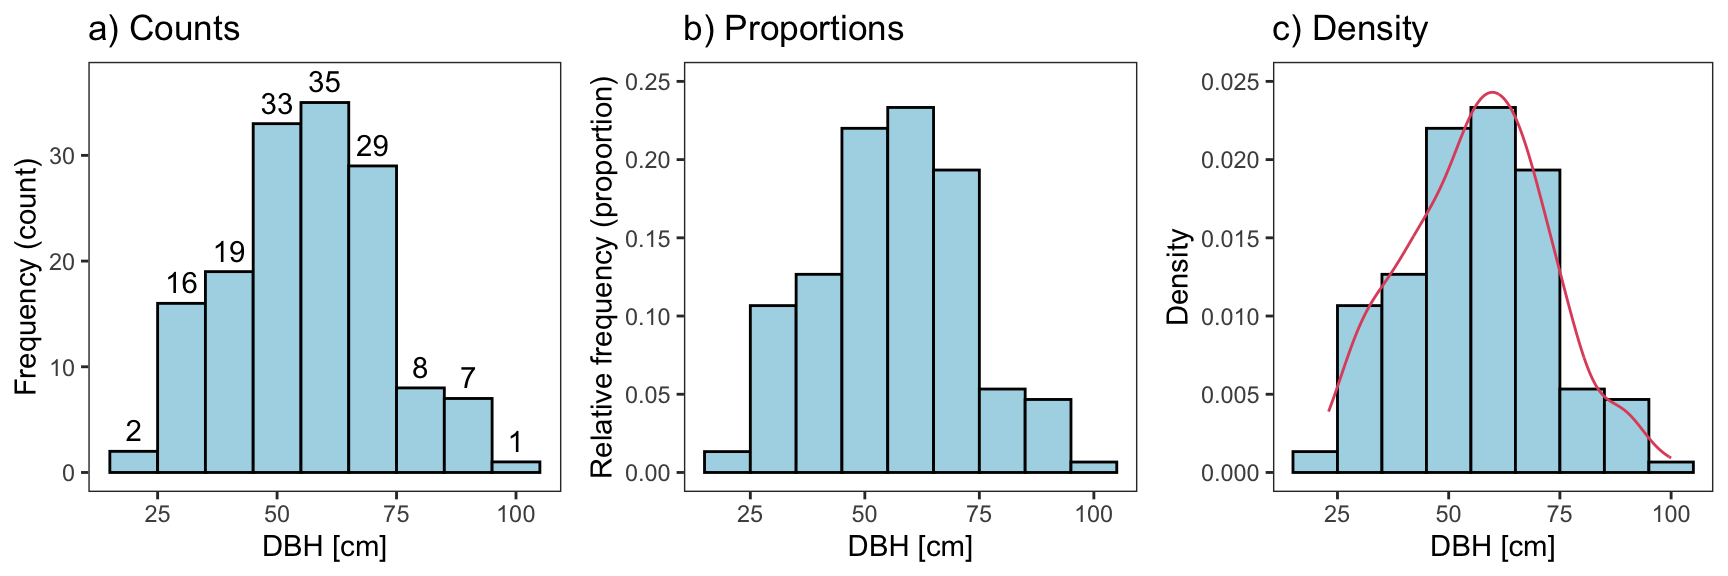 Figure 2. Frequency, proportions, and density distribution of trees.